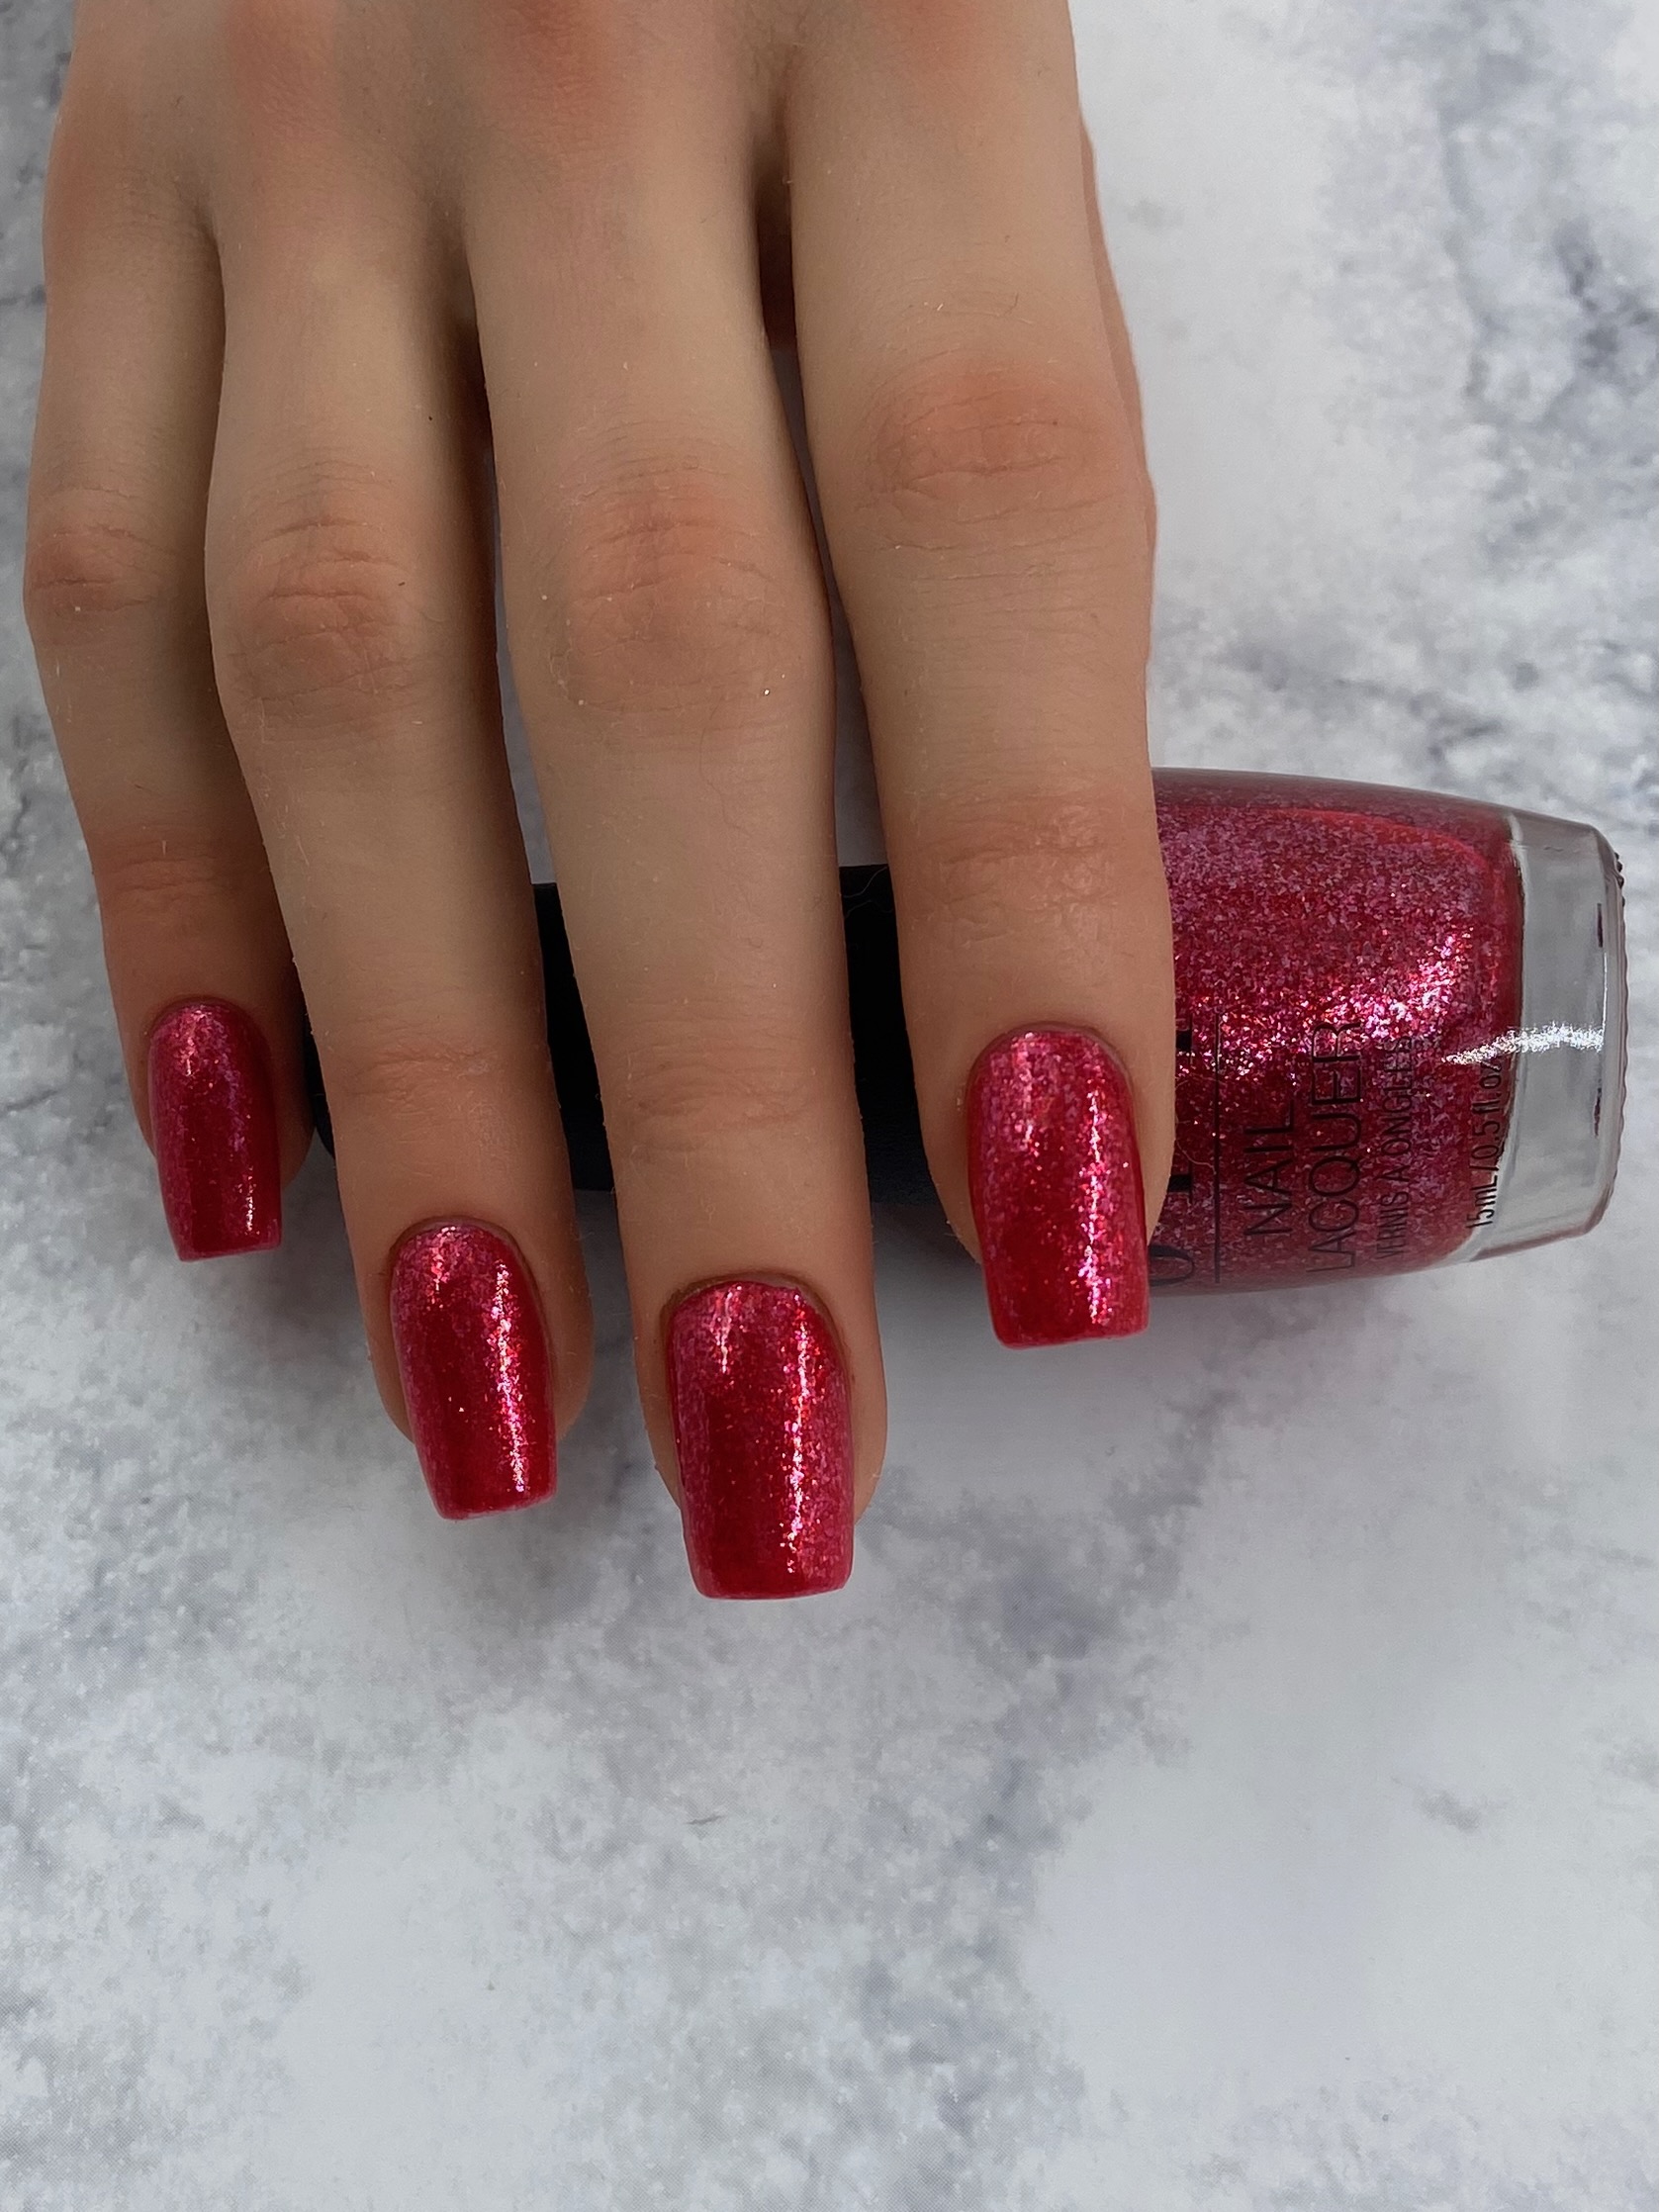 Review: OPI nail lacquer - I STOP for Red